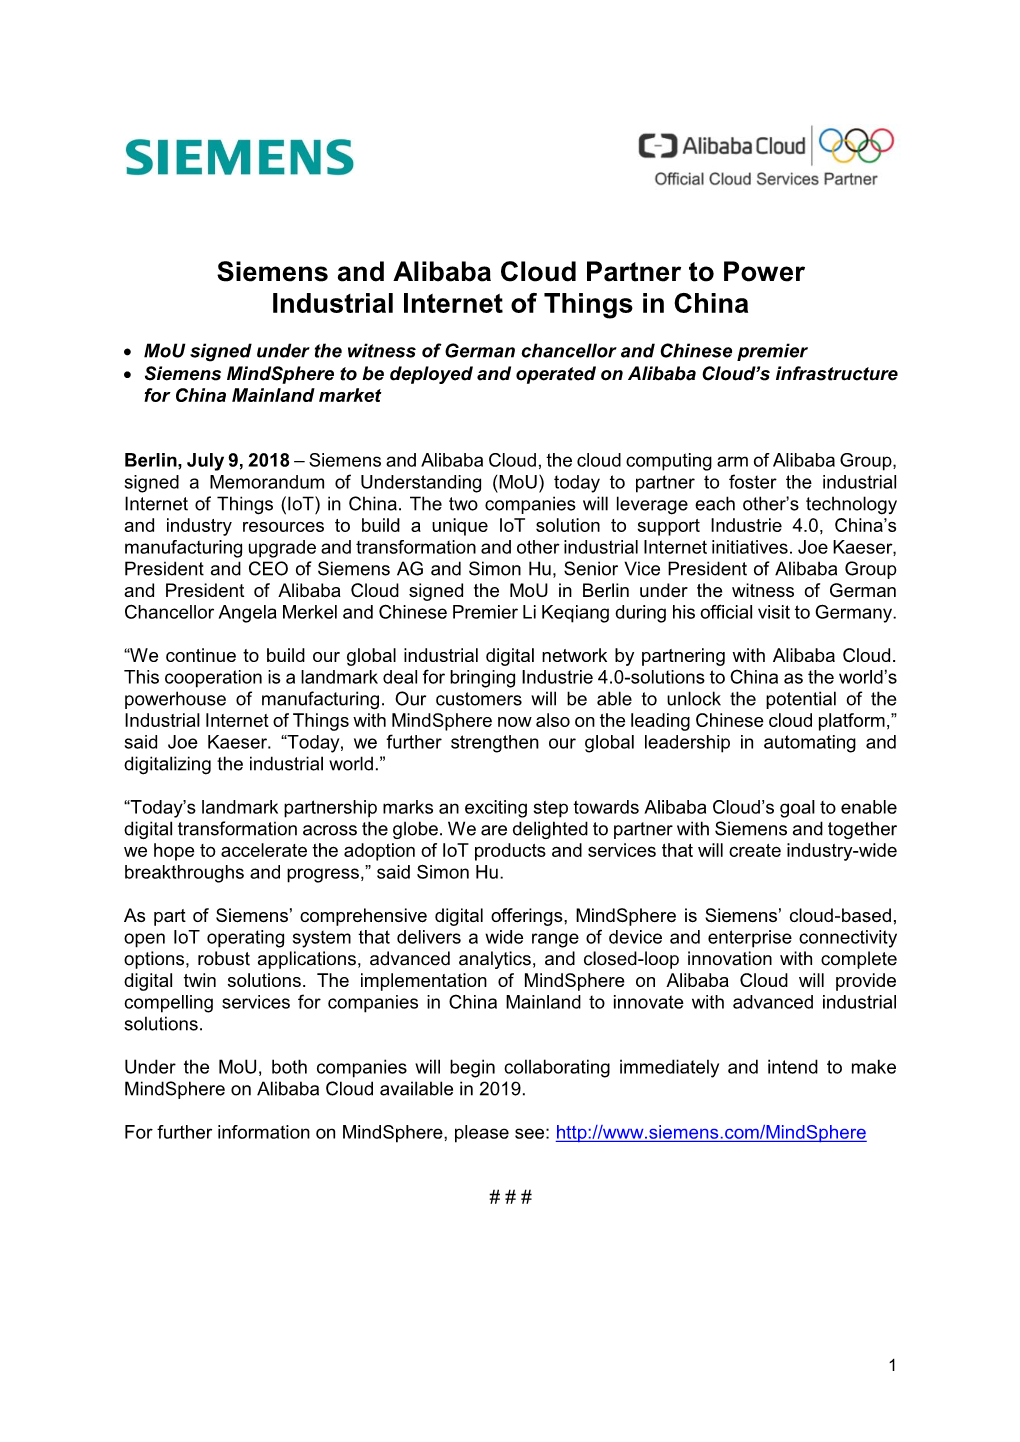 Siemens and Alibaba Cloud Partner to Power Industrial Internet of Things in China